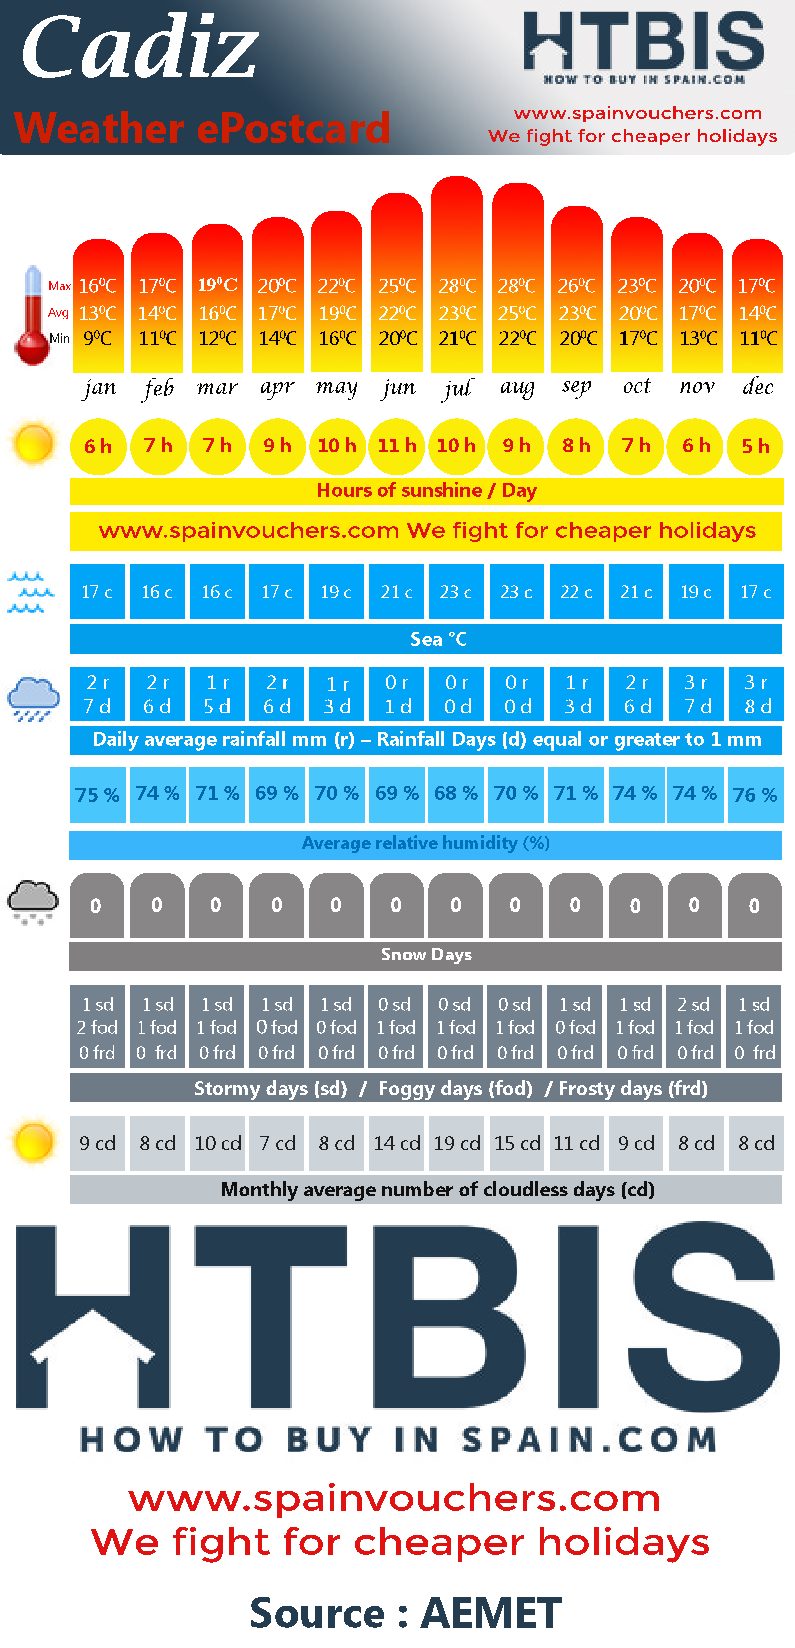 Cadiz Weather Infographic How to buy in Spain